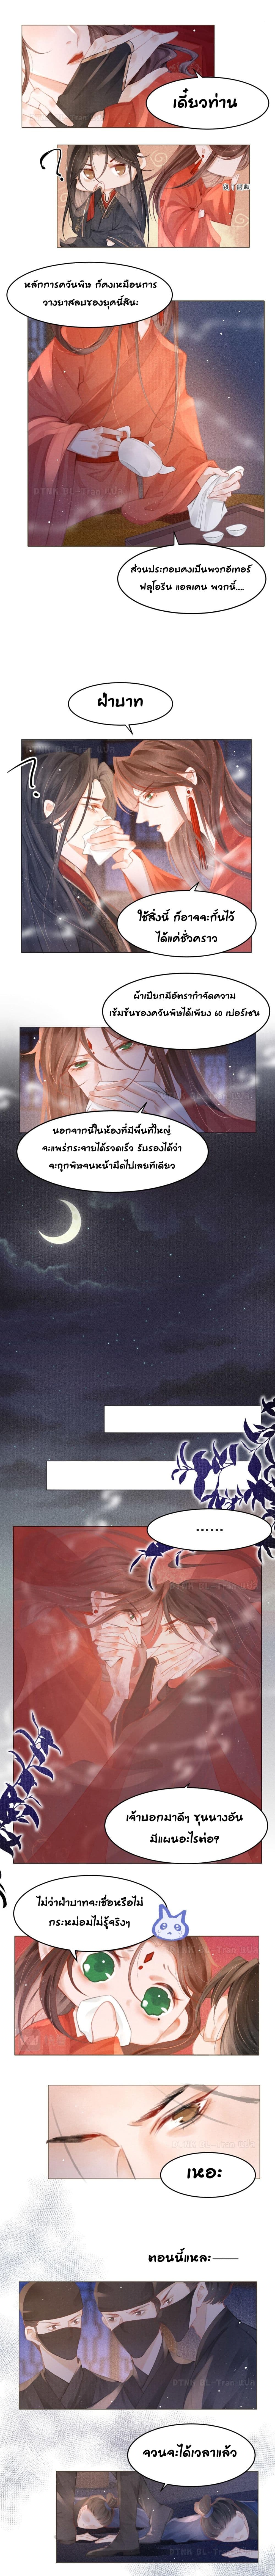 The Lonely King - หน้า 4